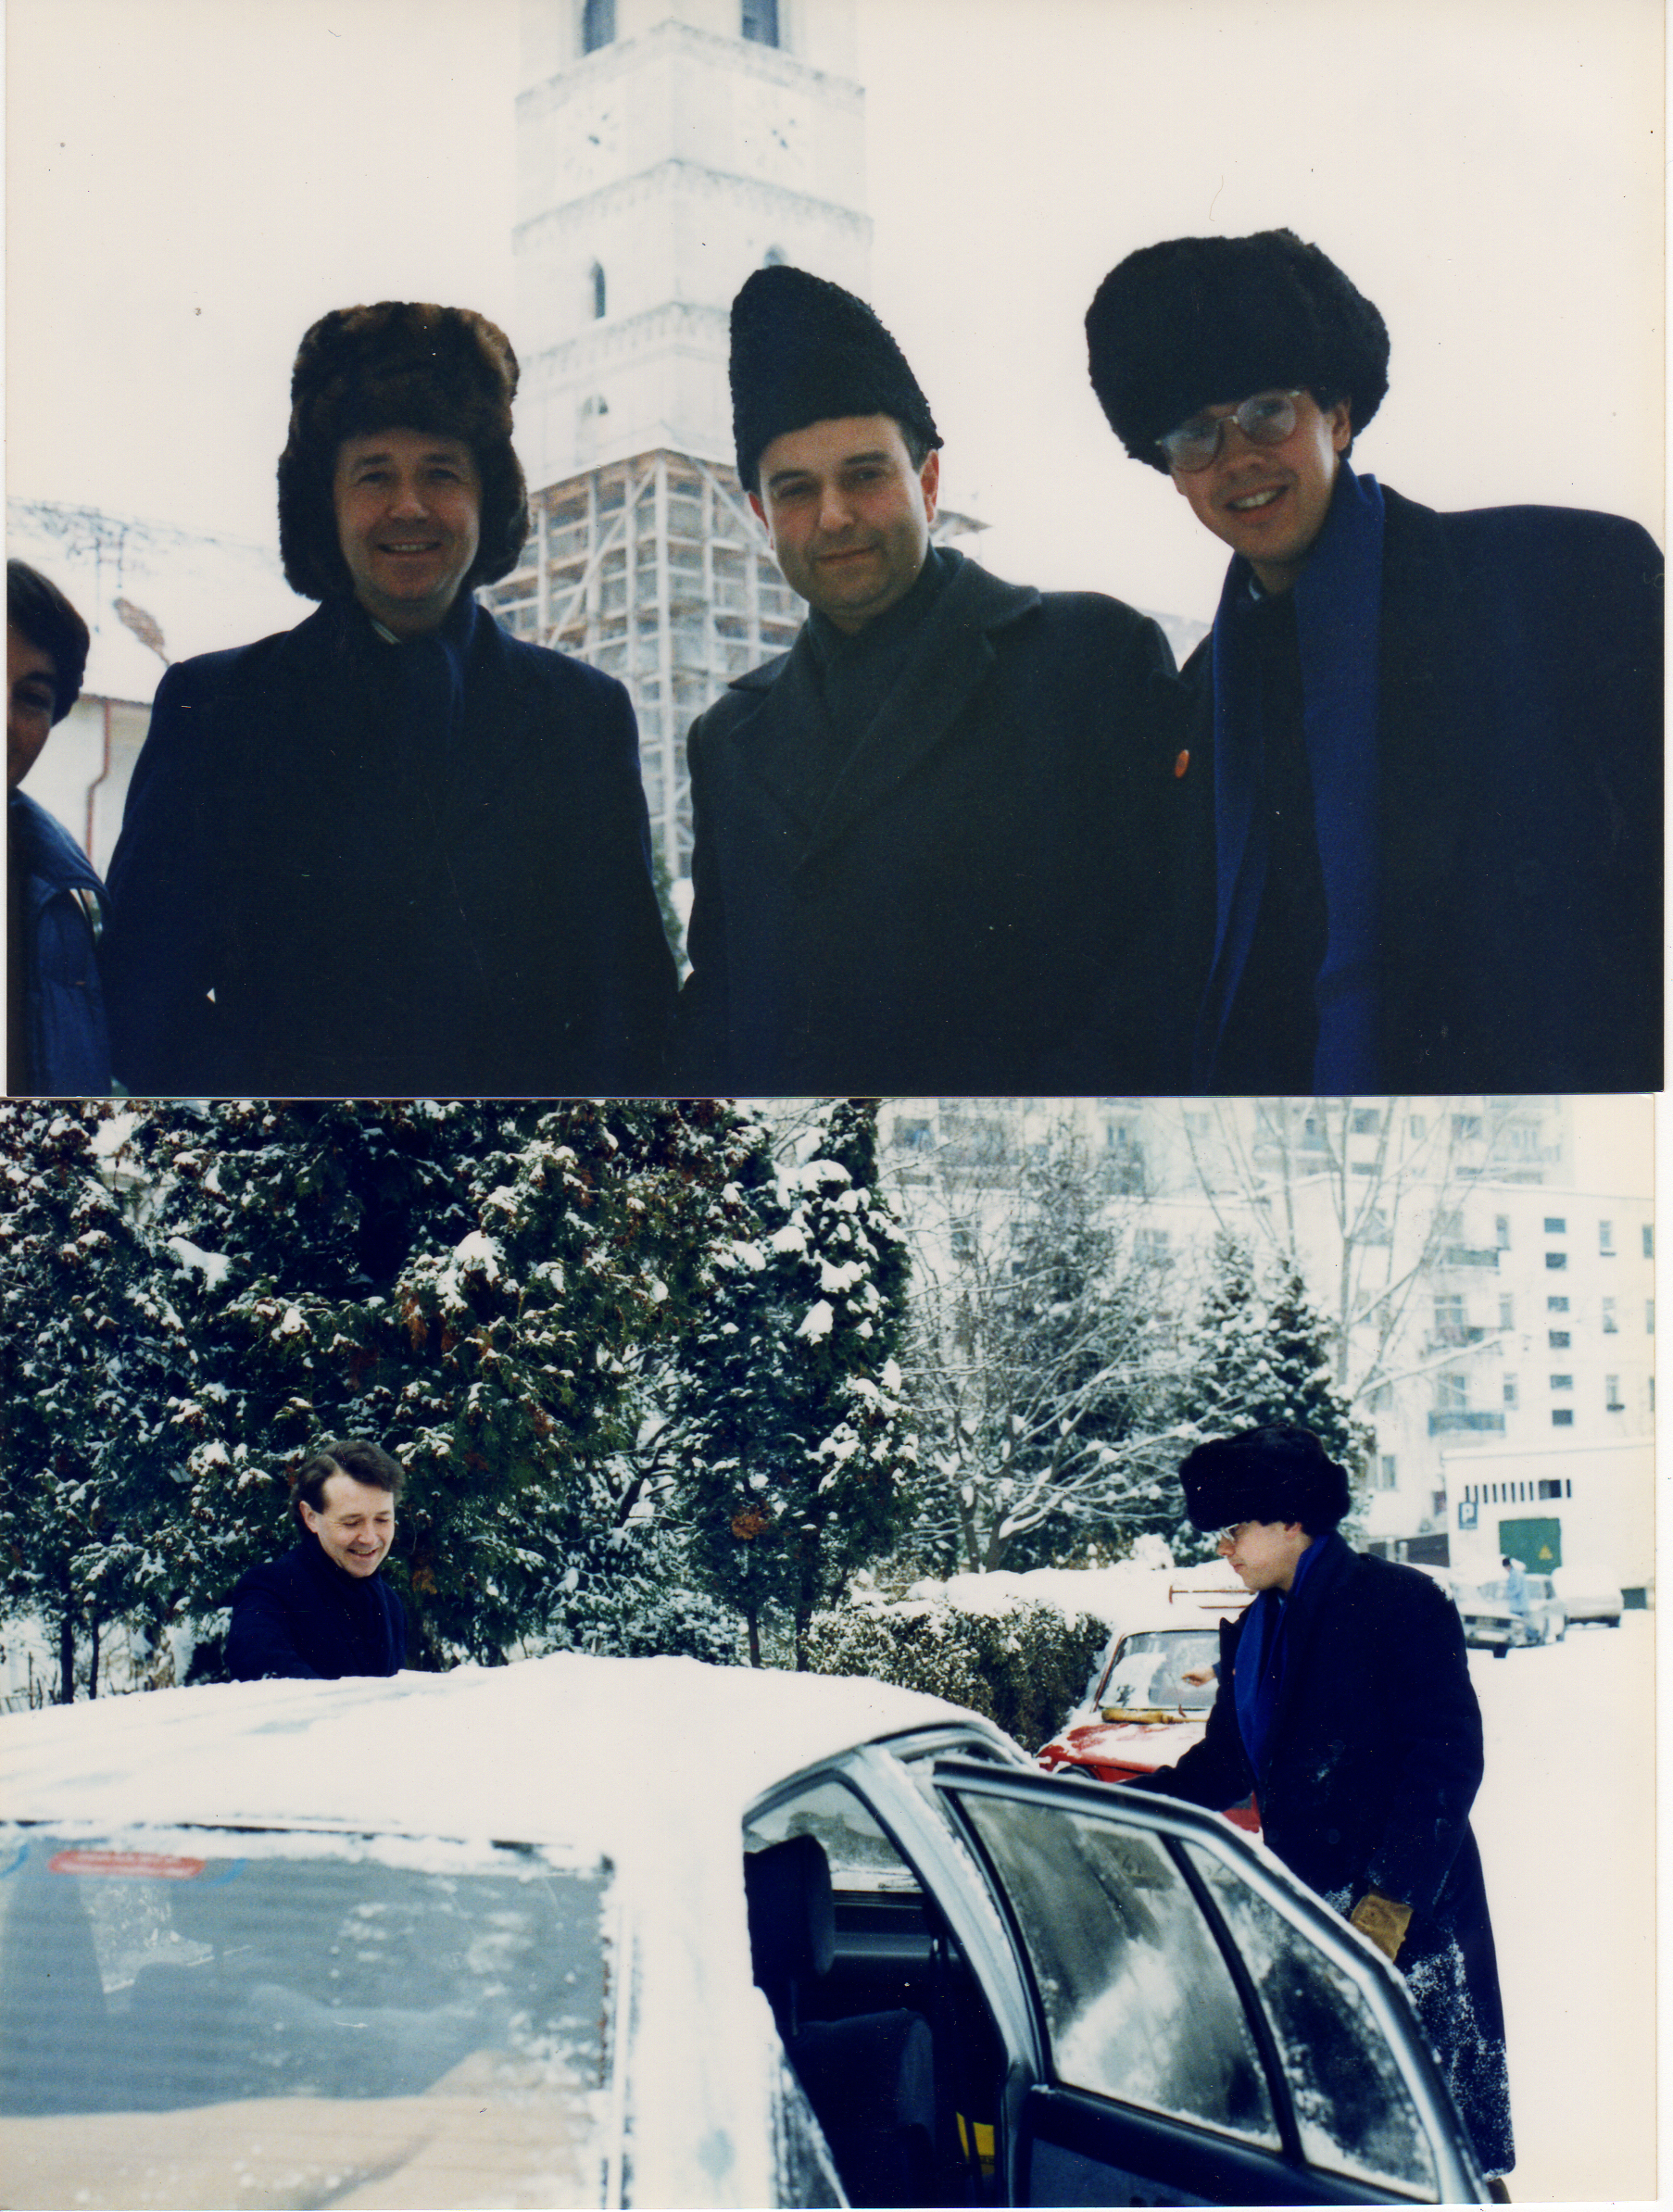 1989 With Bishop Lazlo Tokes, inspiration of the Romanian revolution against Ceaucescu, and with David Campanale